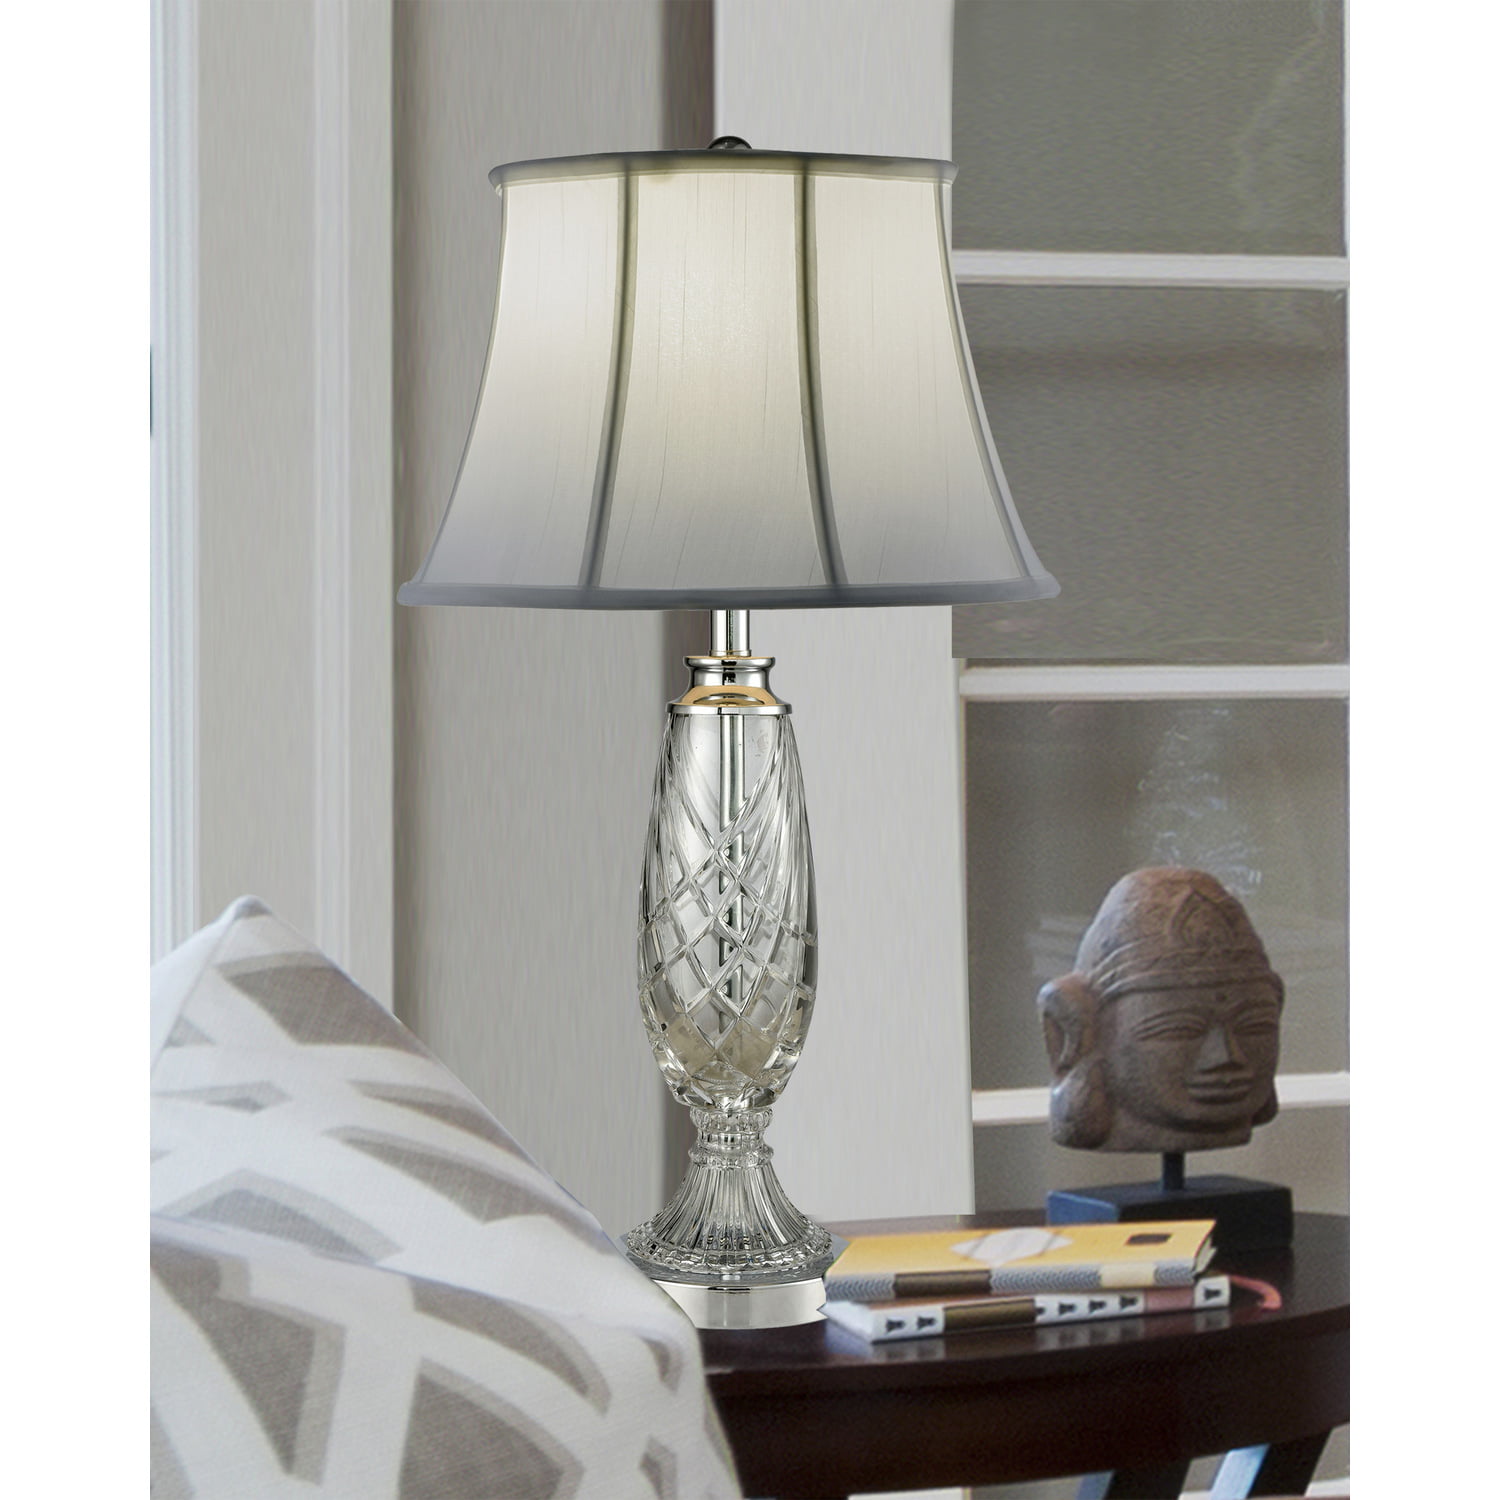 Dale Tiffany Claven 24% Lead Crystal Table Lamp